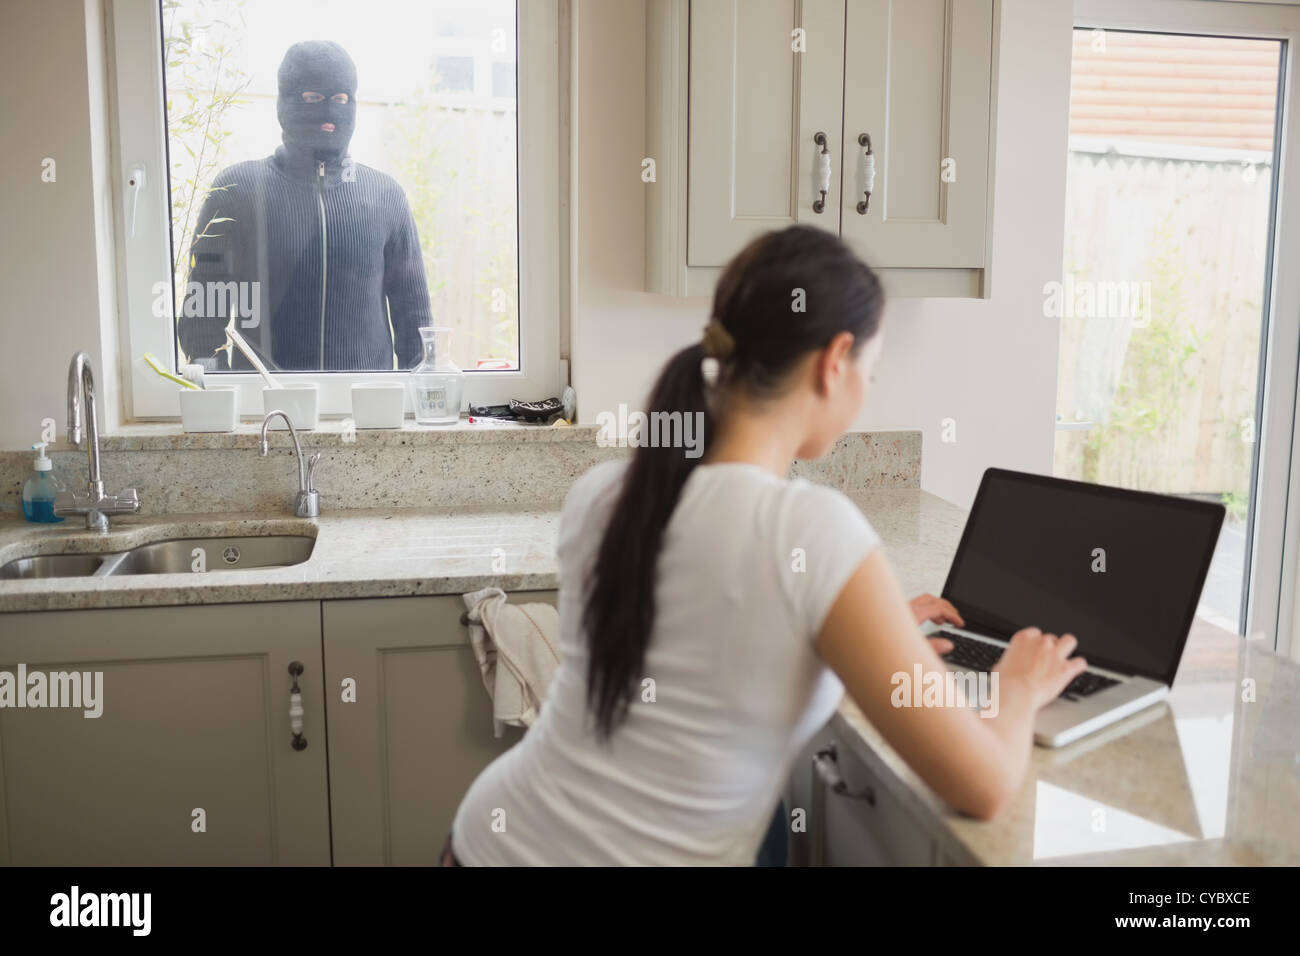 Woman being observed by burglar through window Stock Photo